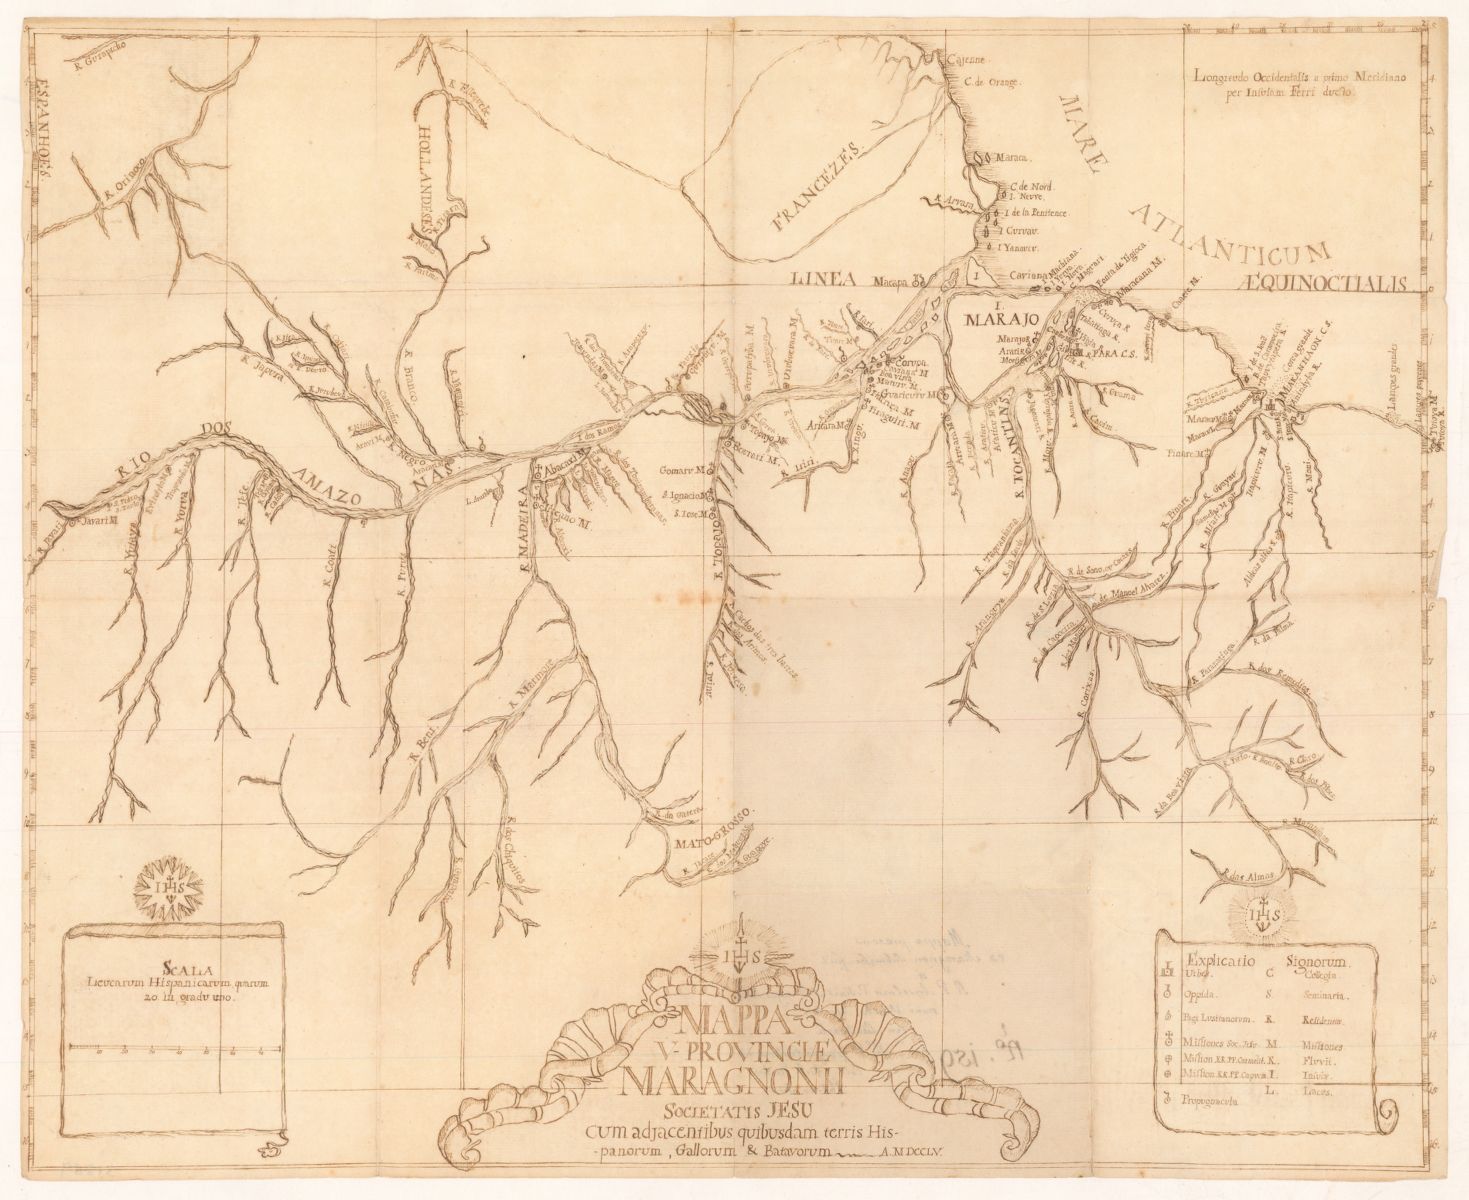 Aselm Eckart, Map of the Amazon (1755). MacLean Collection, MC 9222